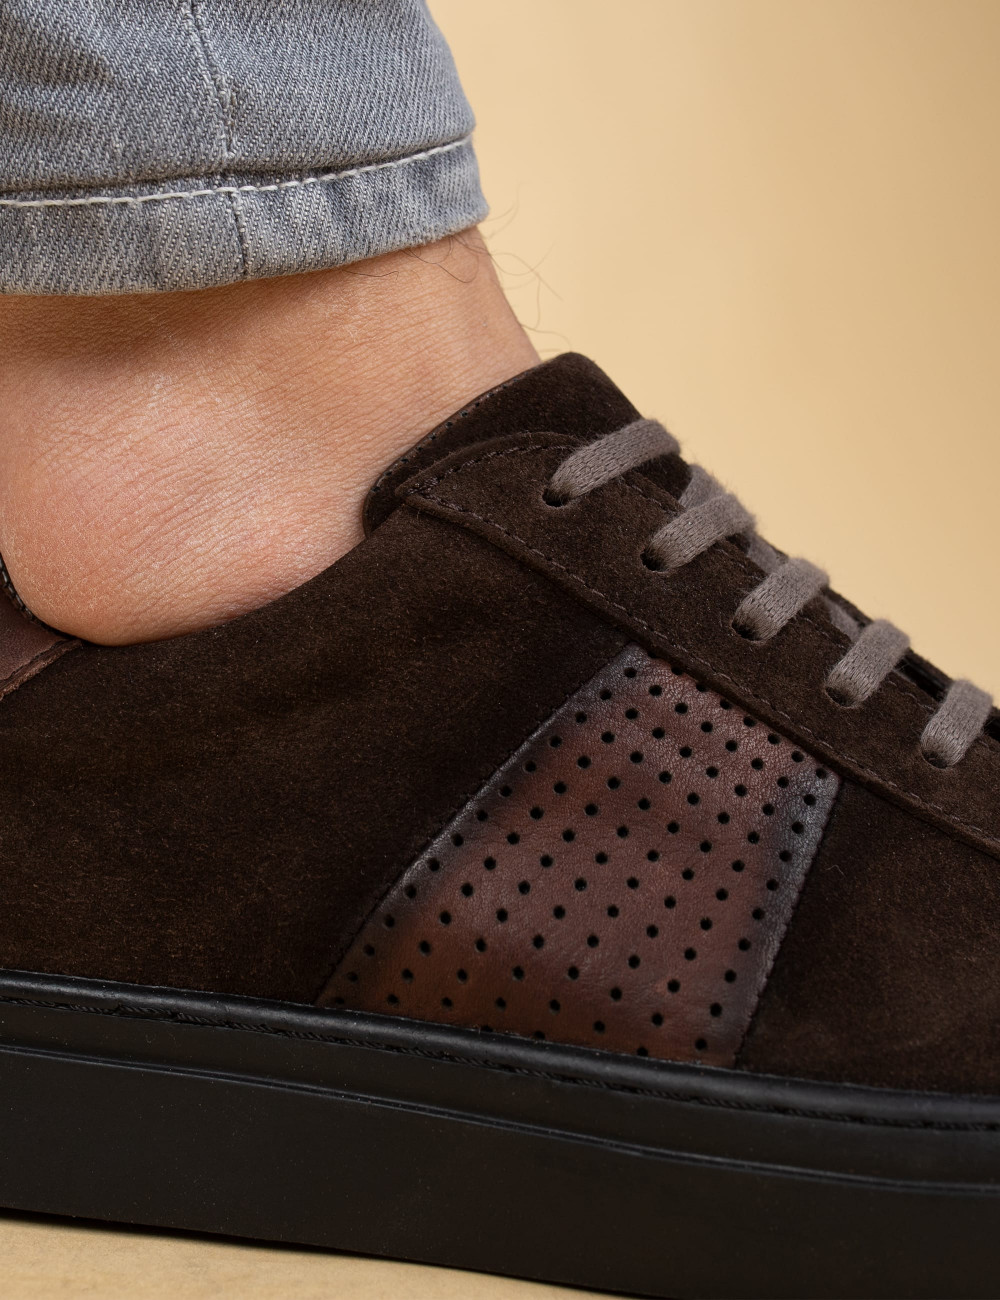 Brown Suede Leather Sneakers - 01740MKHVC01